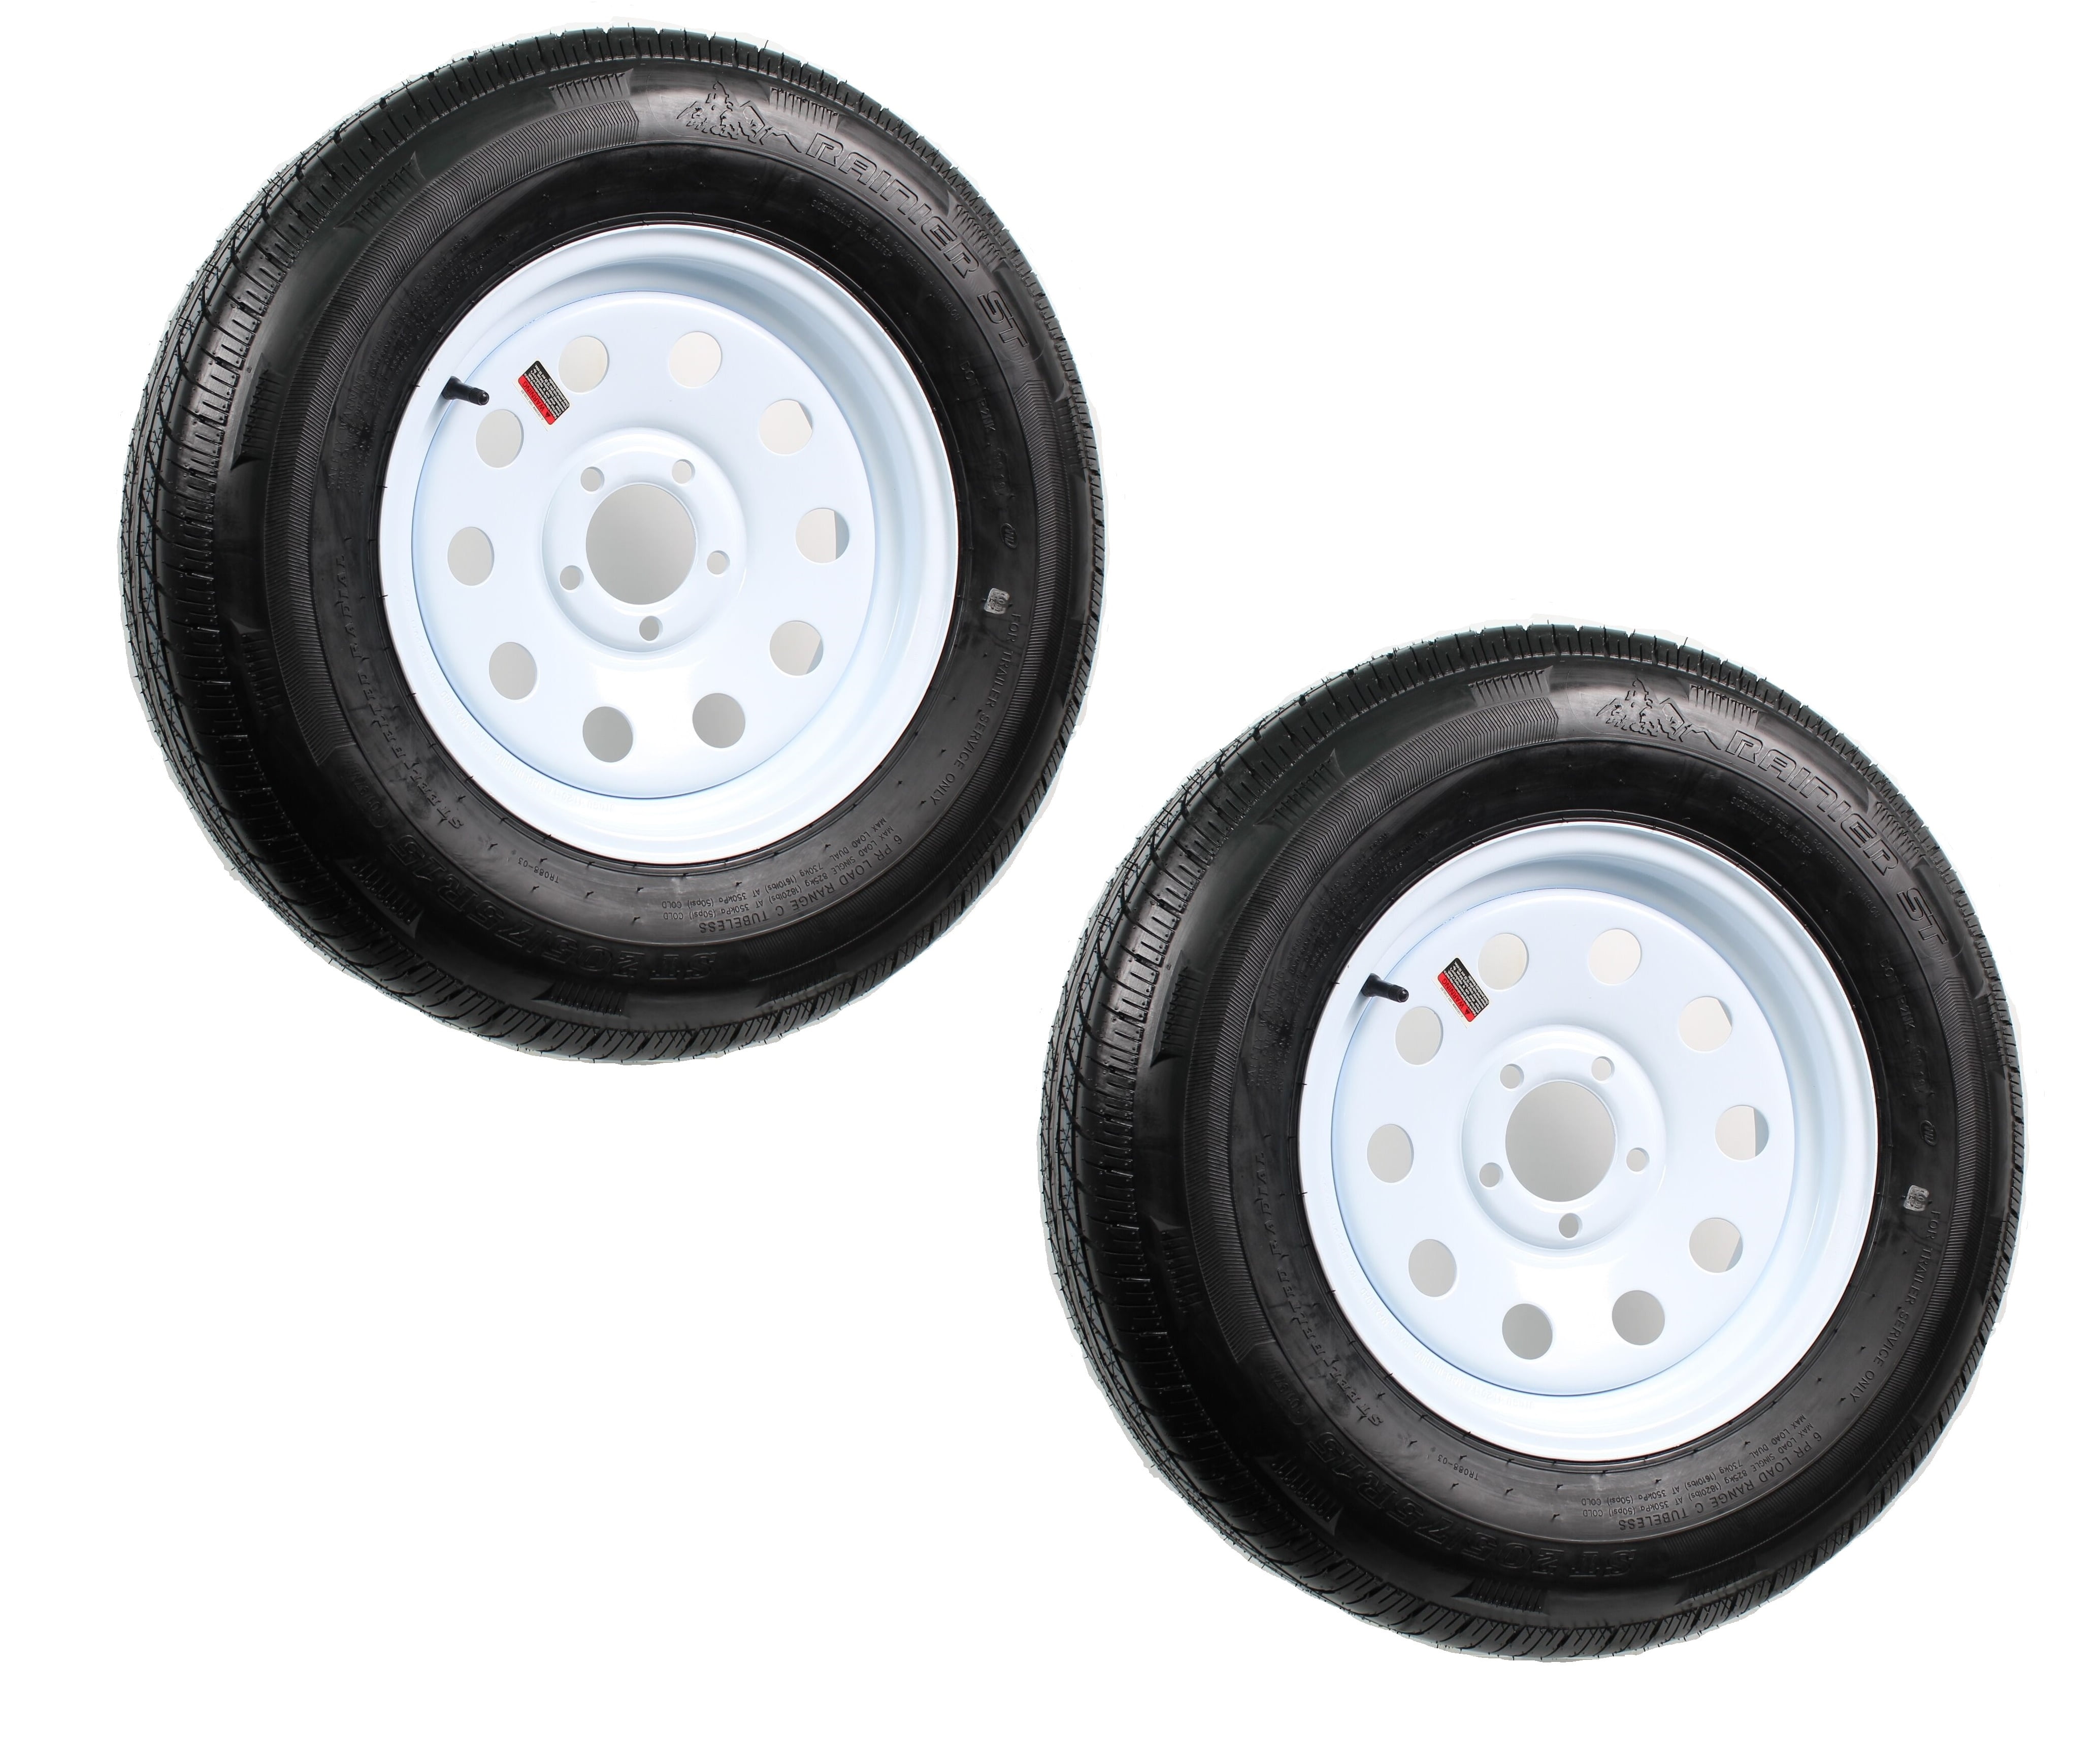 205-75-14 ST205-75R14 High Speed LOAD RANGE C 205-75R14 NORTH AMERICA D.O.T mounted on 5 bolt WHITE powder coated steel rim RADIAL trailer tire APPROVED